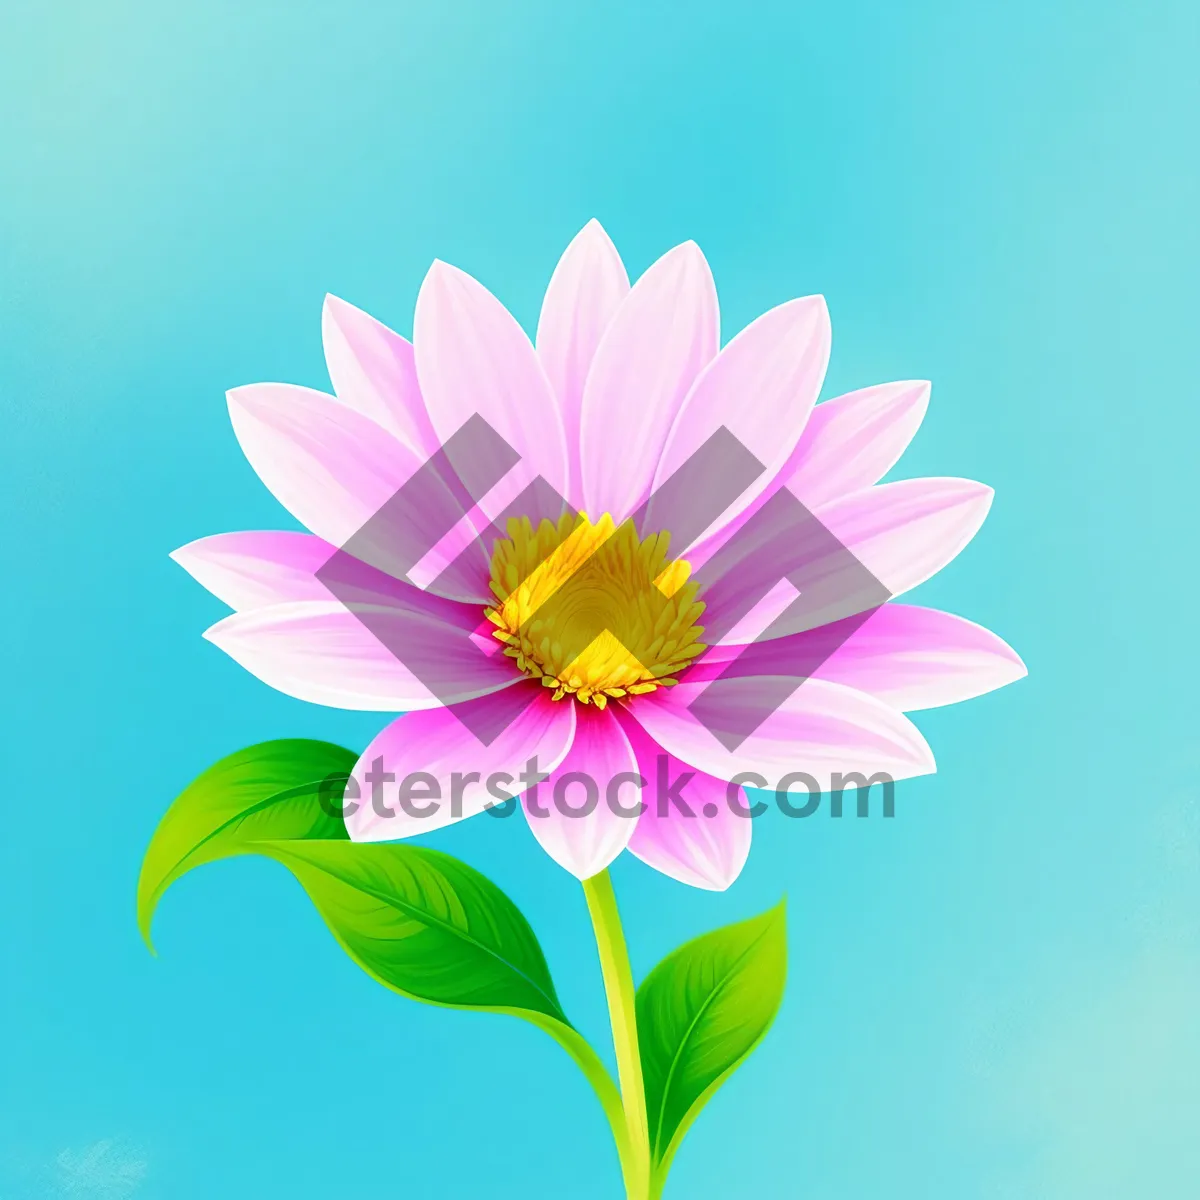 Picture of Vibrant Lotus Blossom in Full Bloom